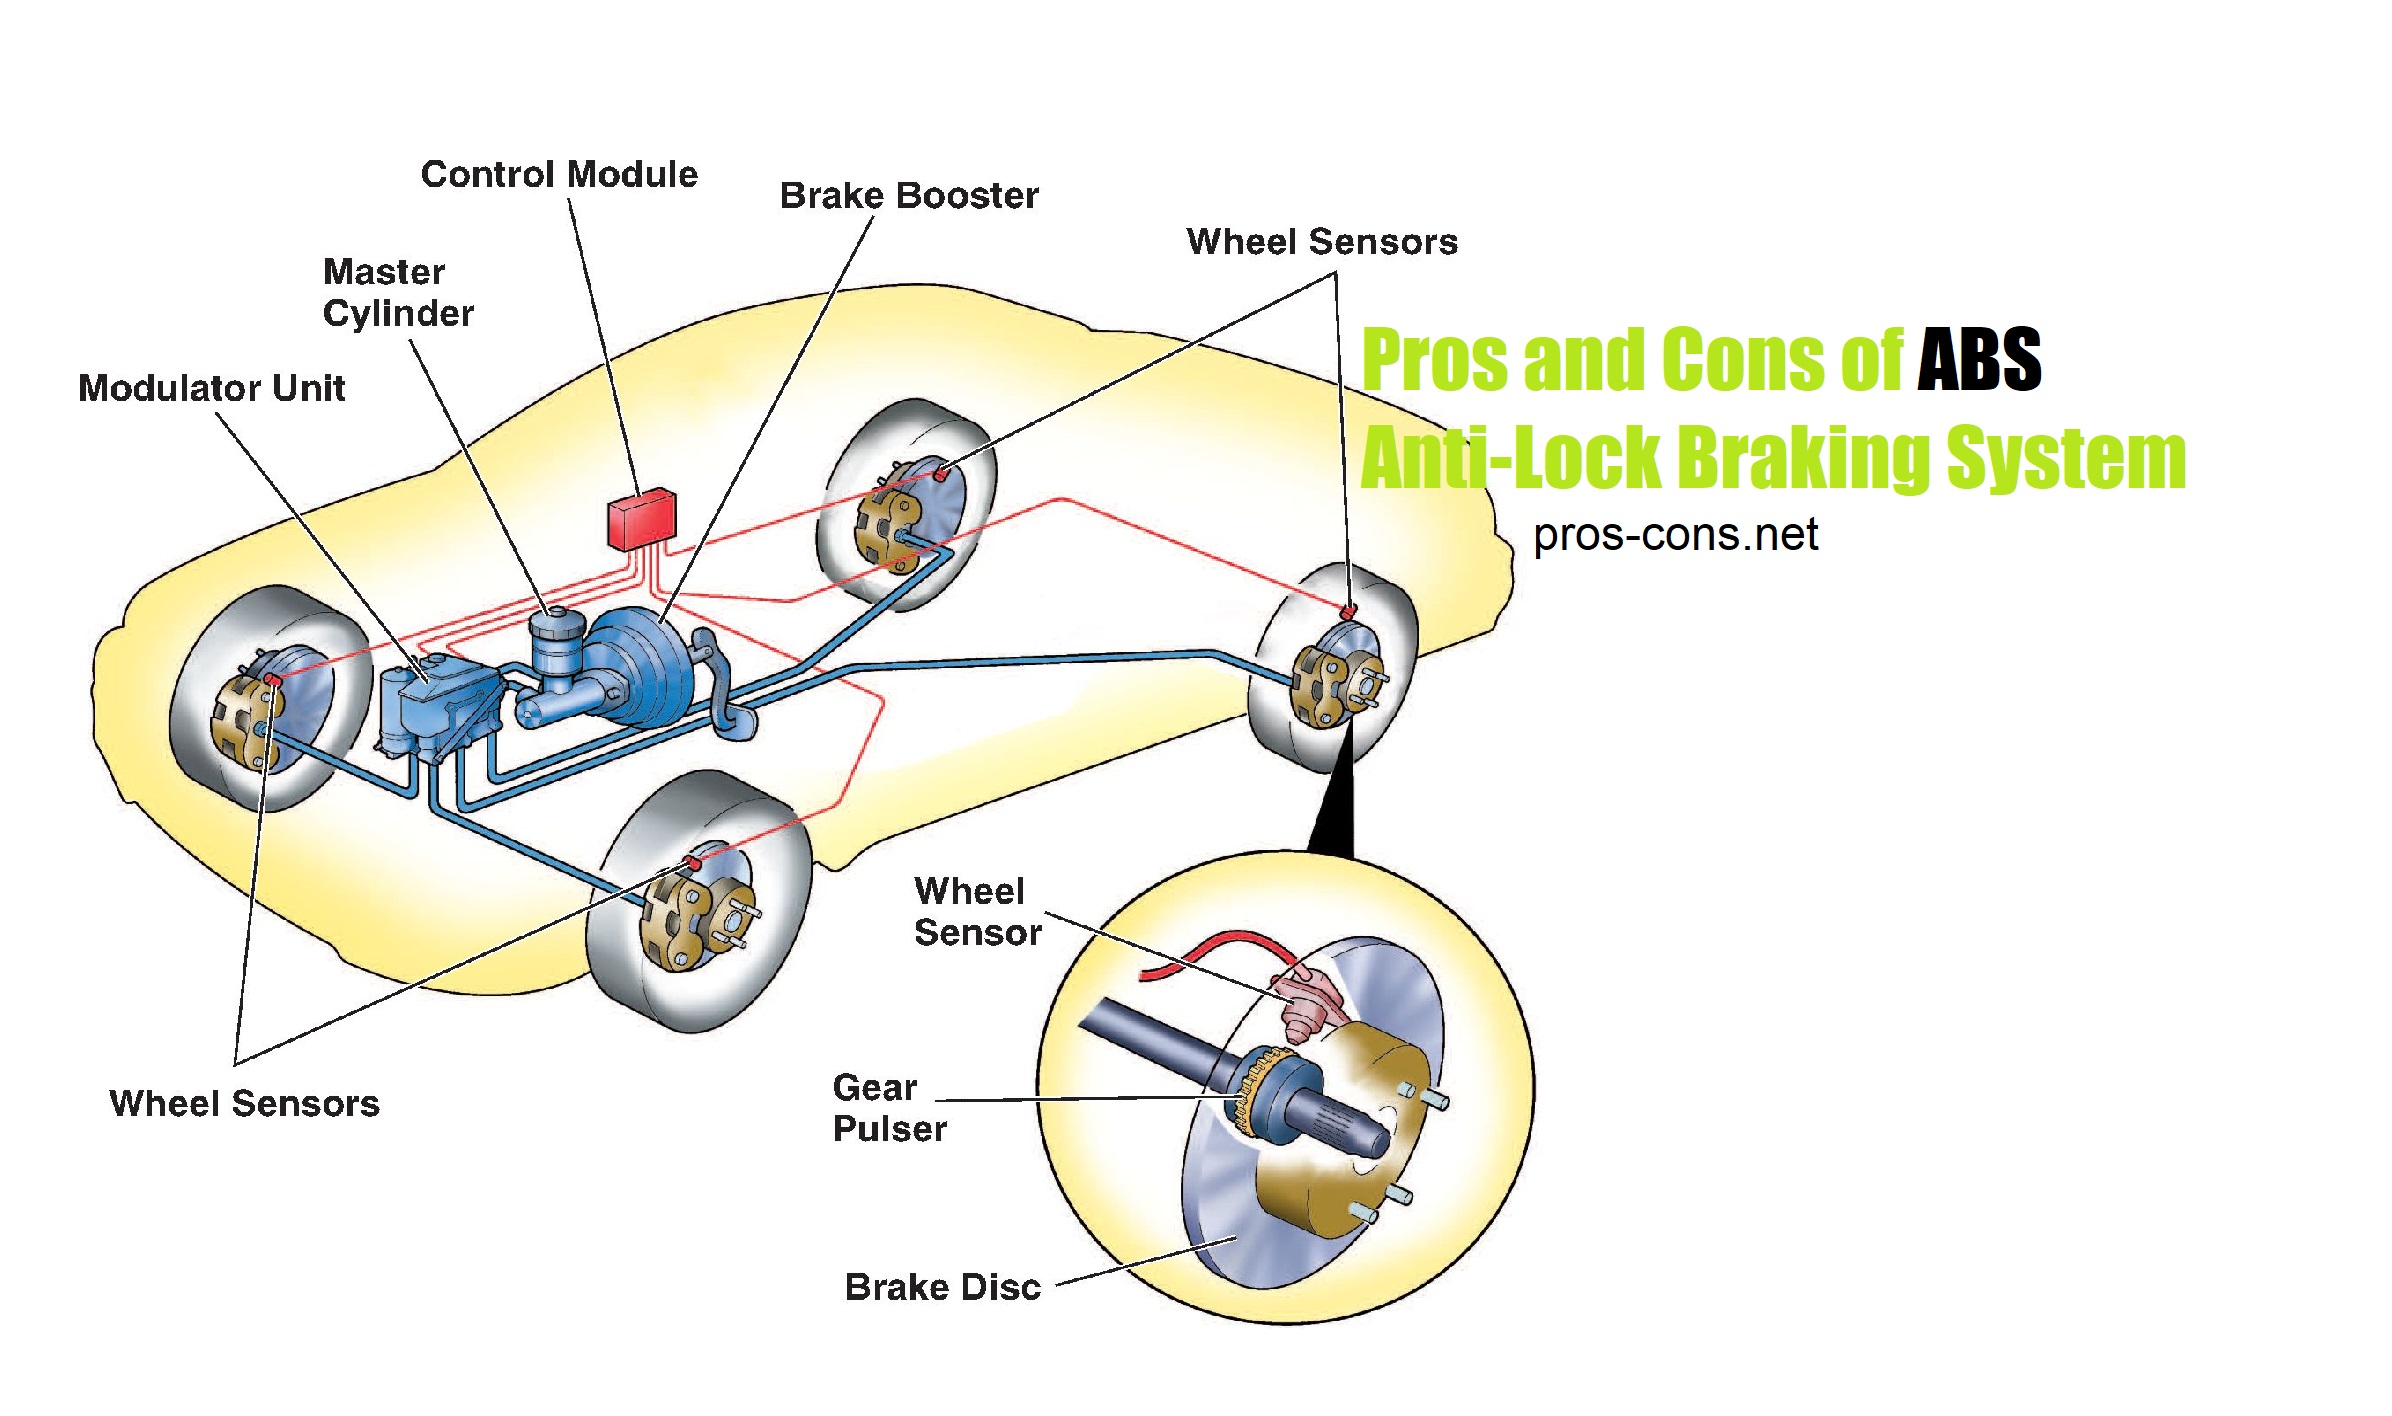 Pros and Cons of Anti-Lock Braking System